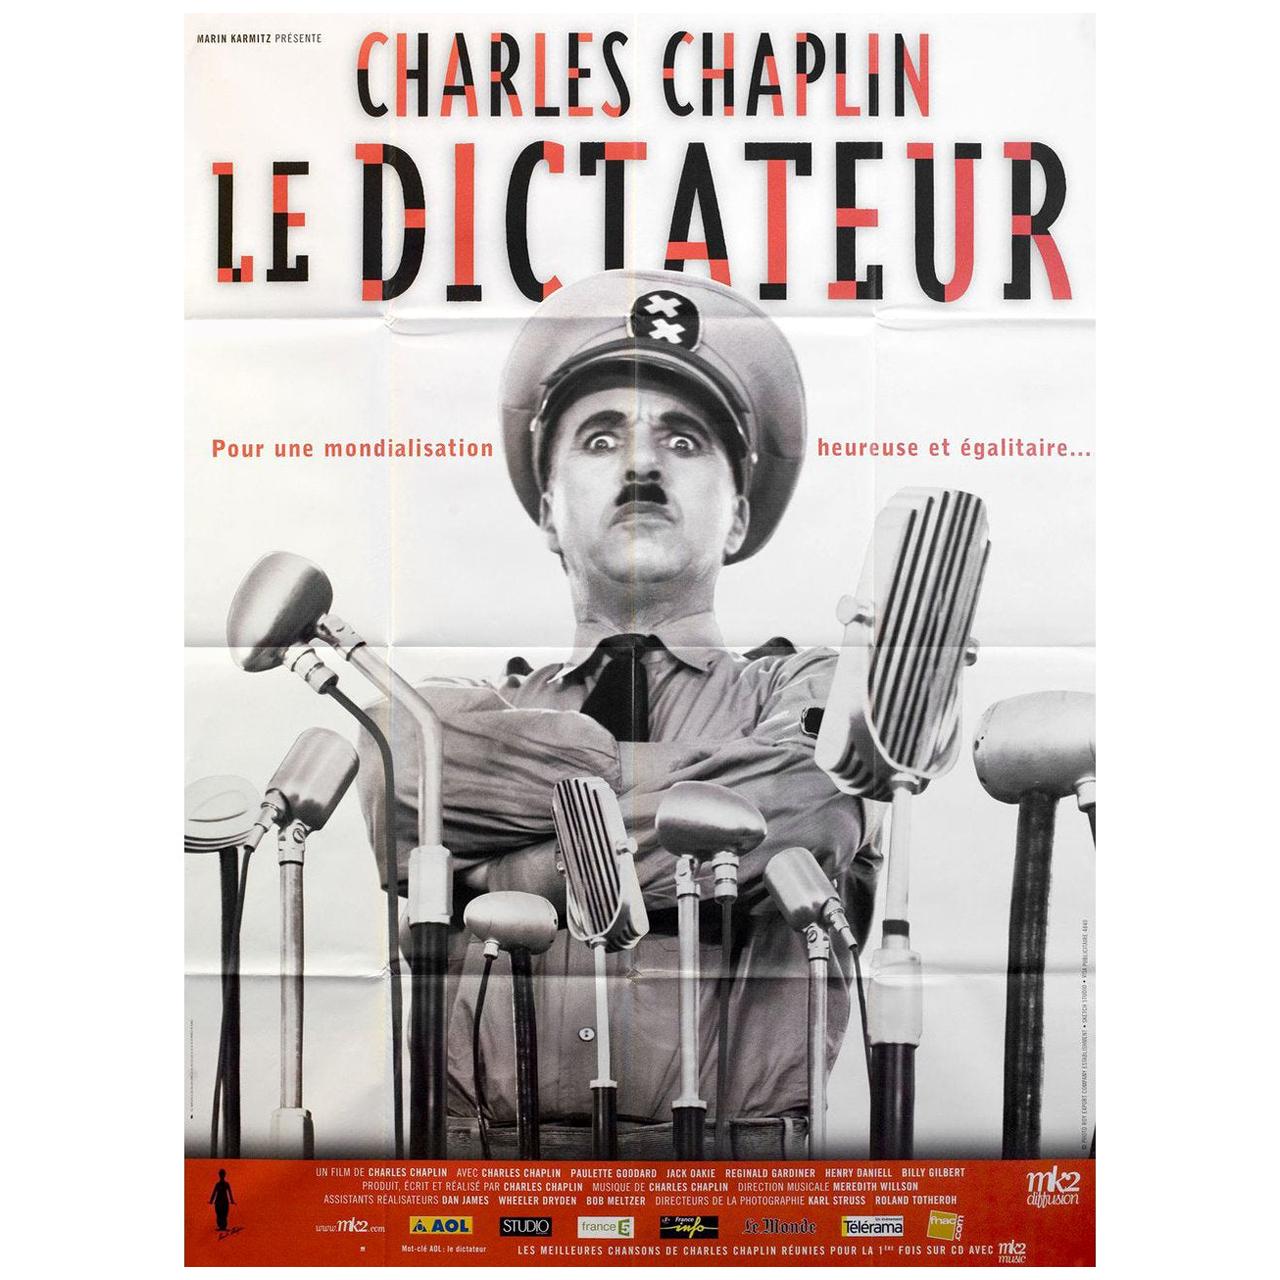 'The Great Dictator' R2002 French Grande Film Poster